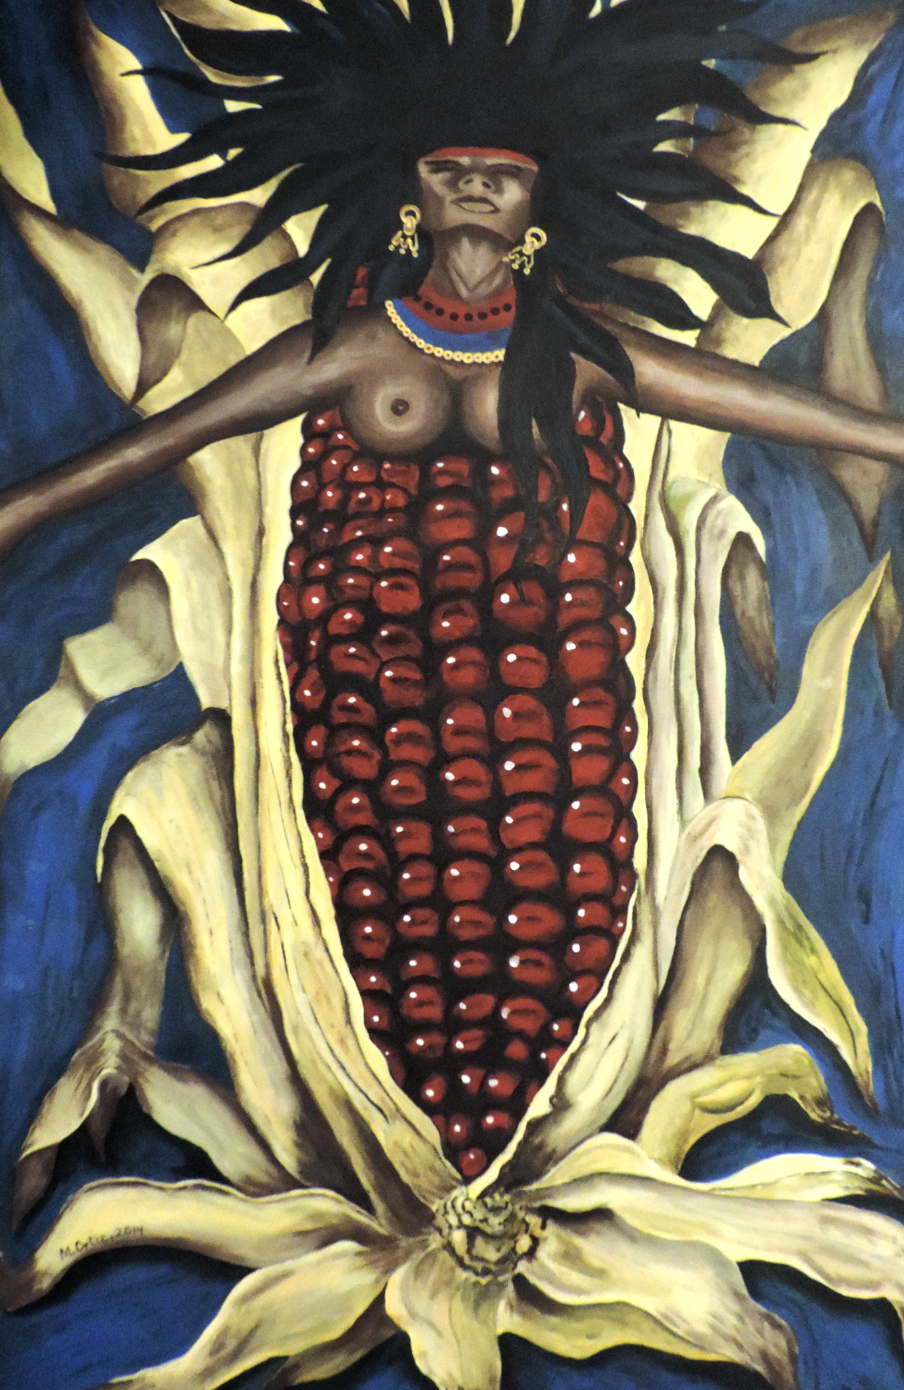 Maize is entwined in the history and traditions of Mexico. Artwork by Marcelo Ortiz